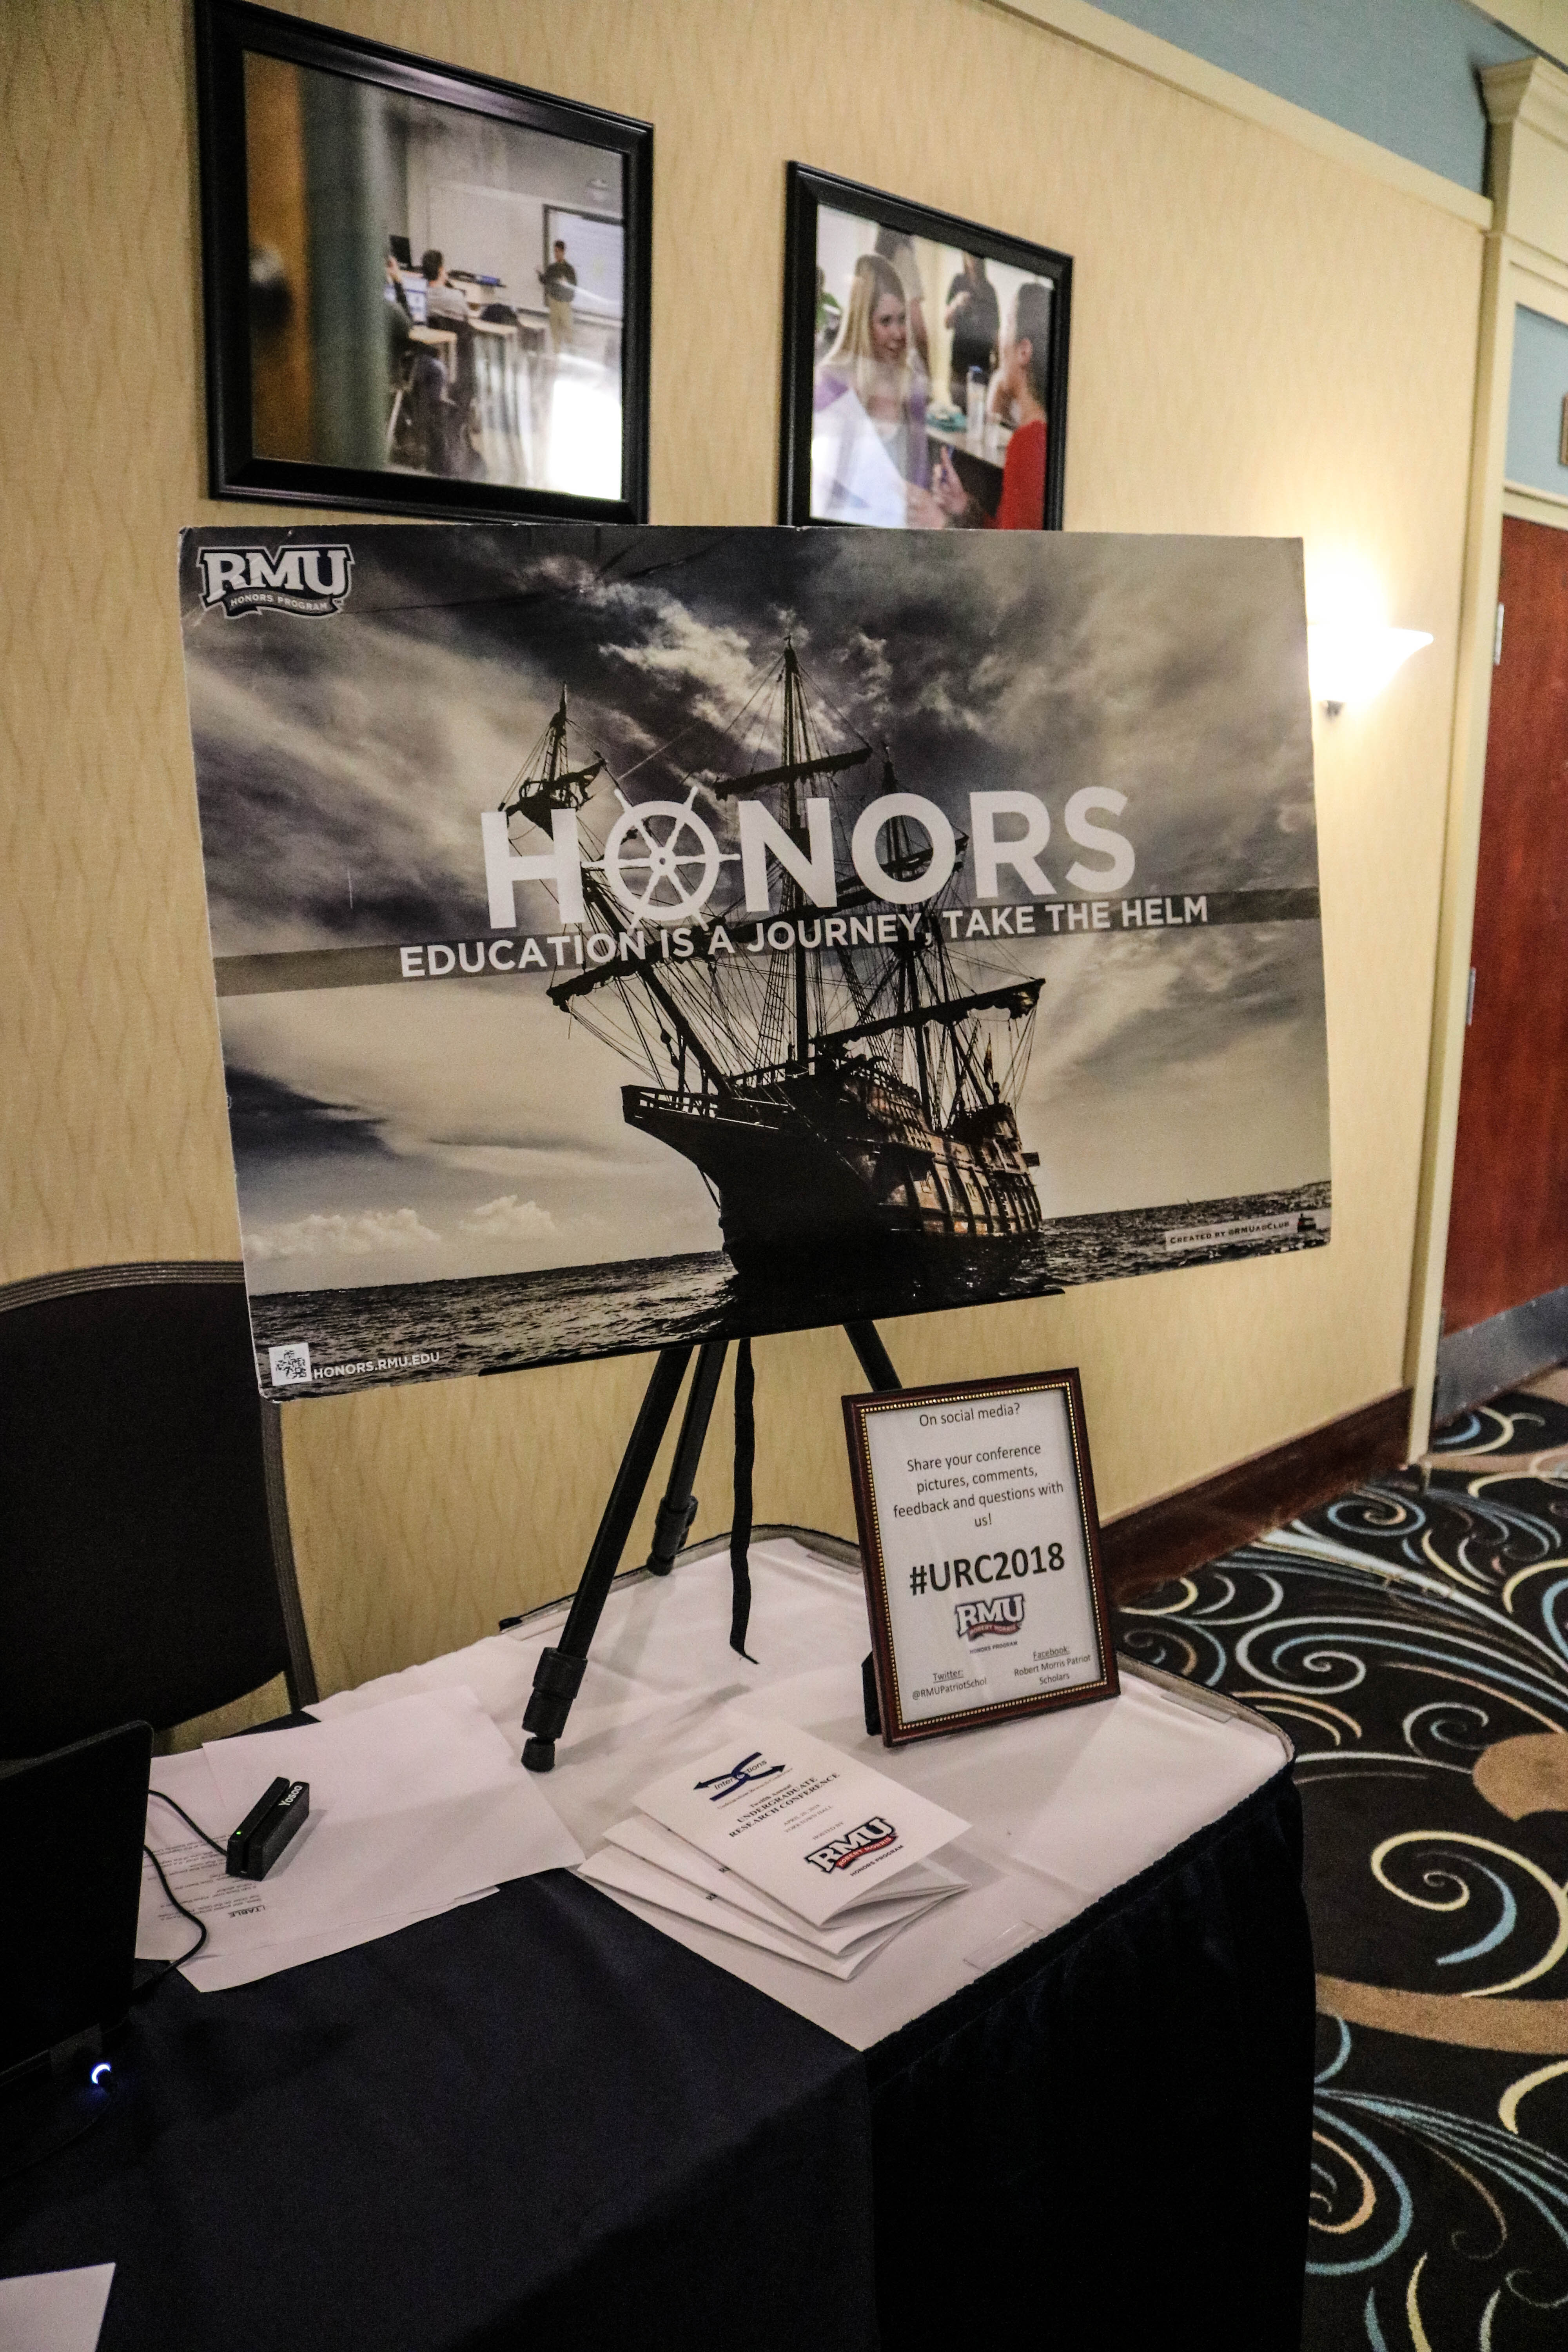 Honors "education is a journey: take the helm" poster with image of a ship.